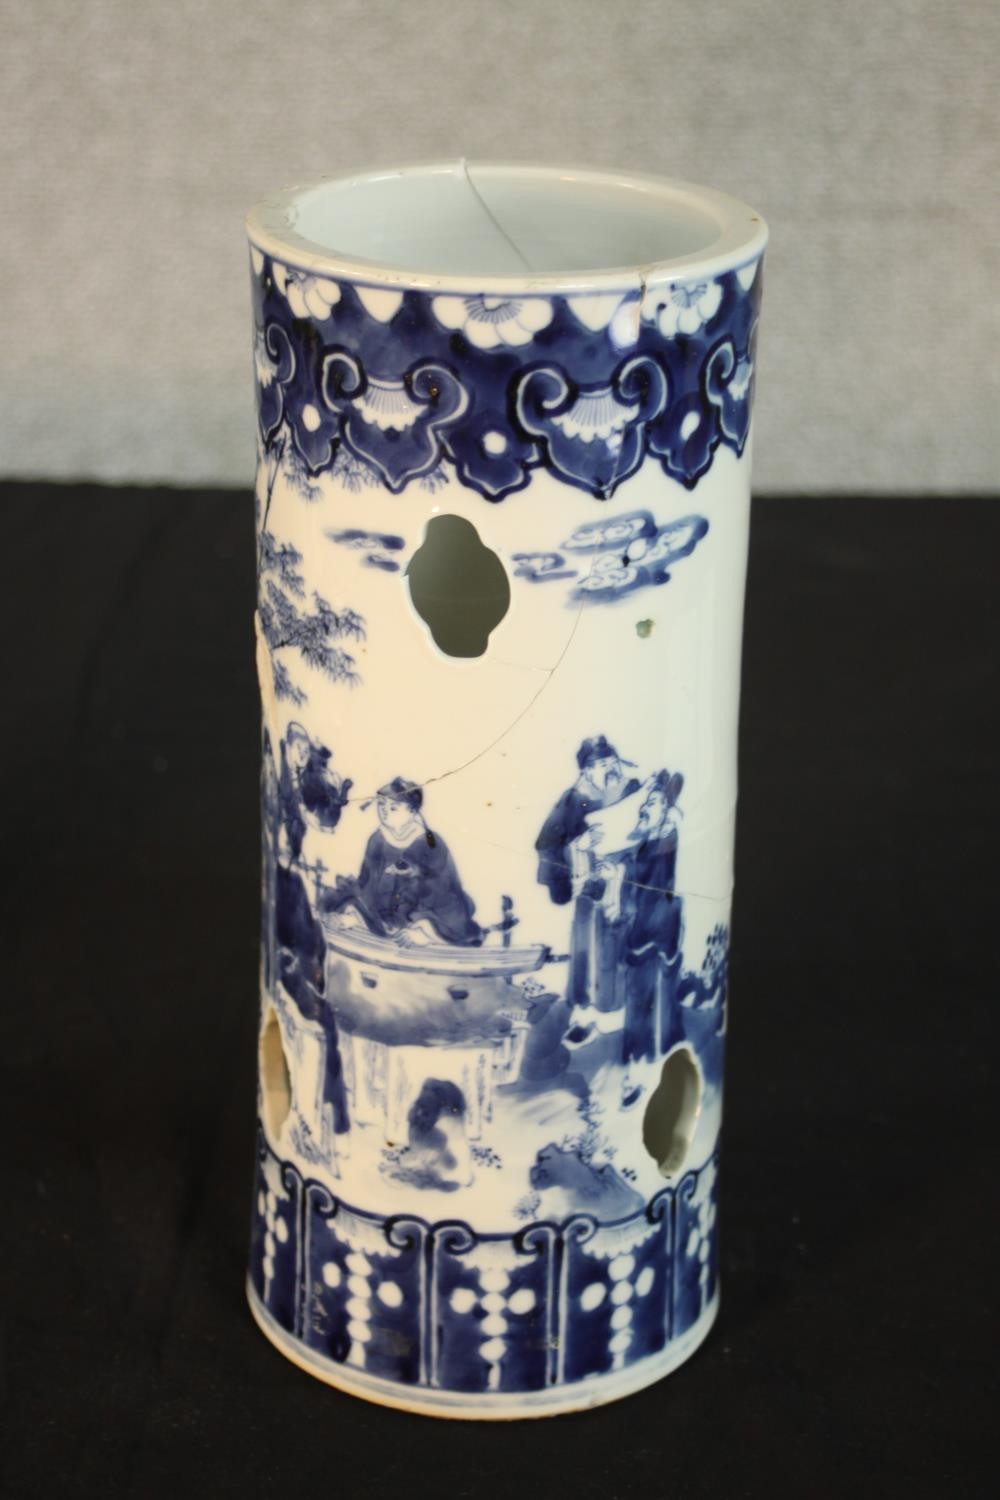 A Chinese blue and white porcelain candle holder painted with flying dragon and flaming pearl - Image 4 of 7